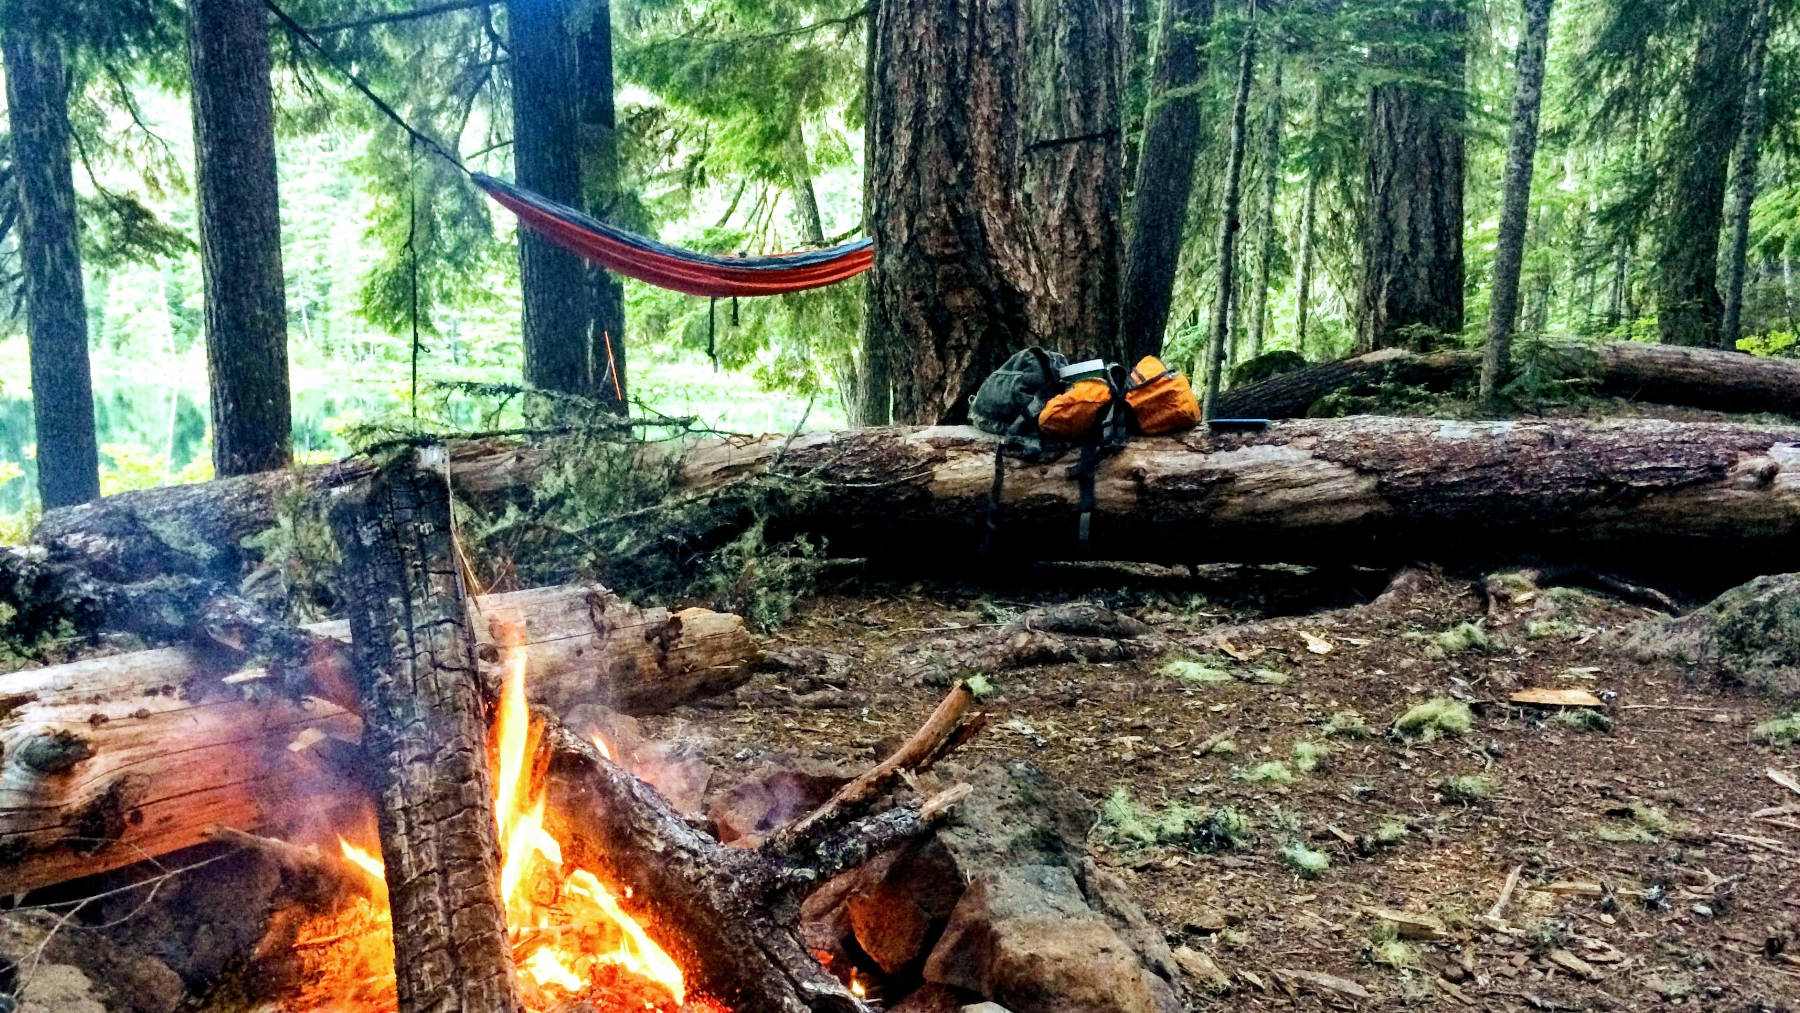 Campsite with a hammock and campfire - Hello Trail